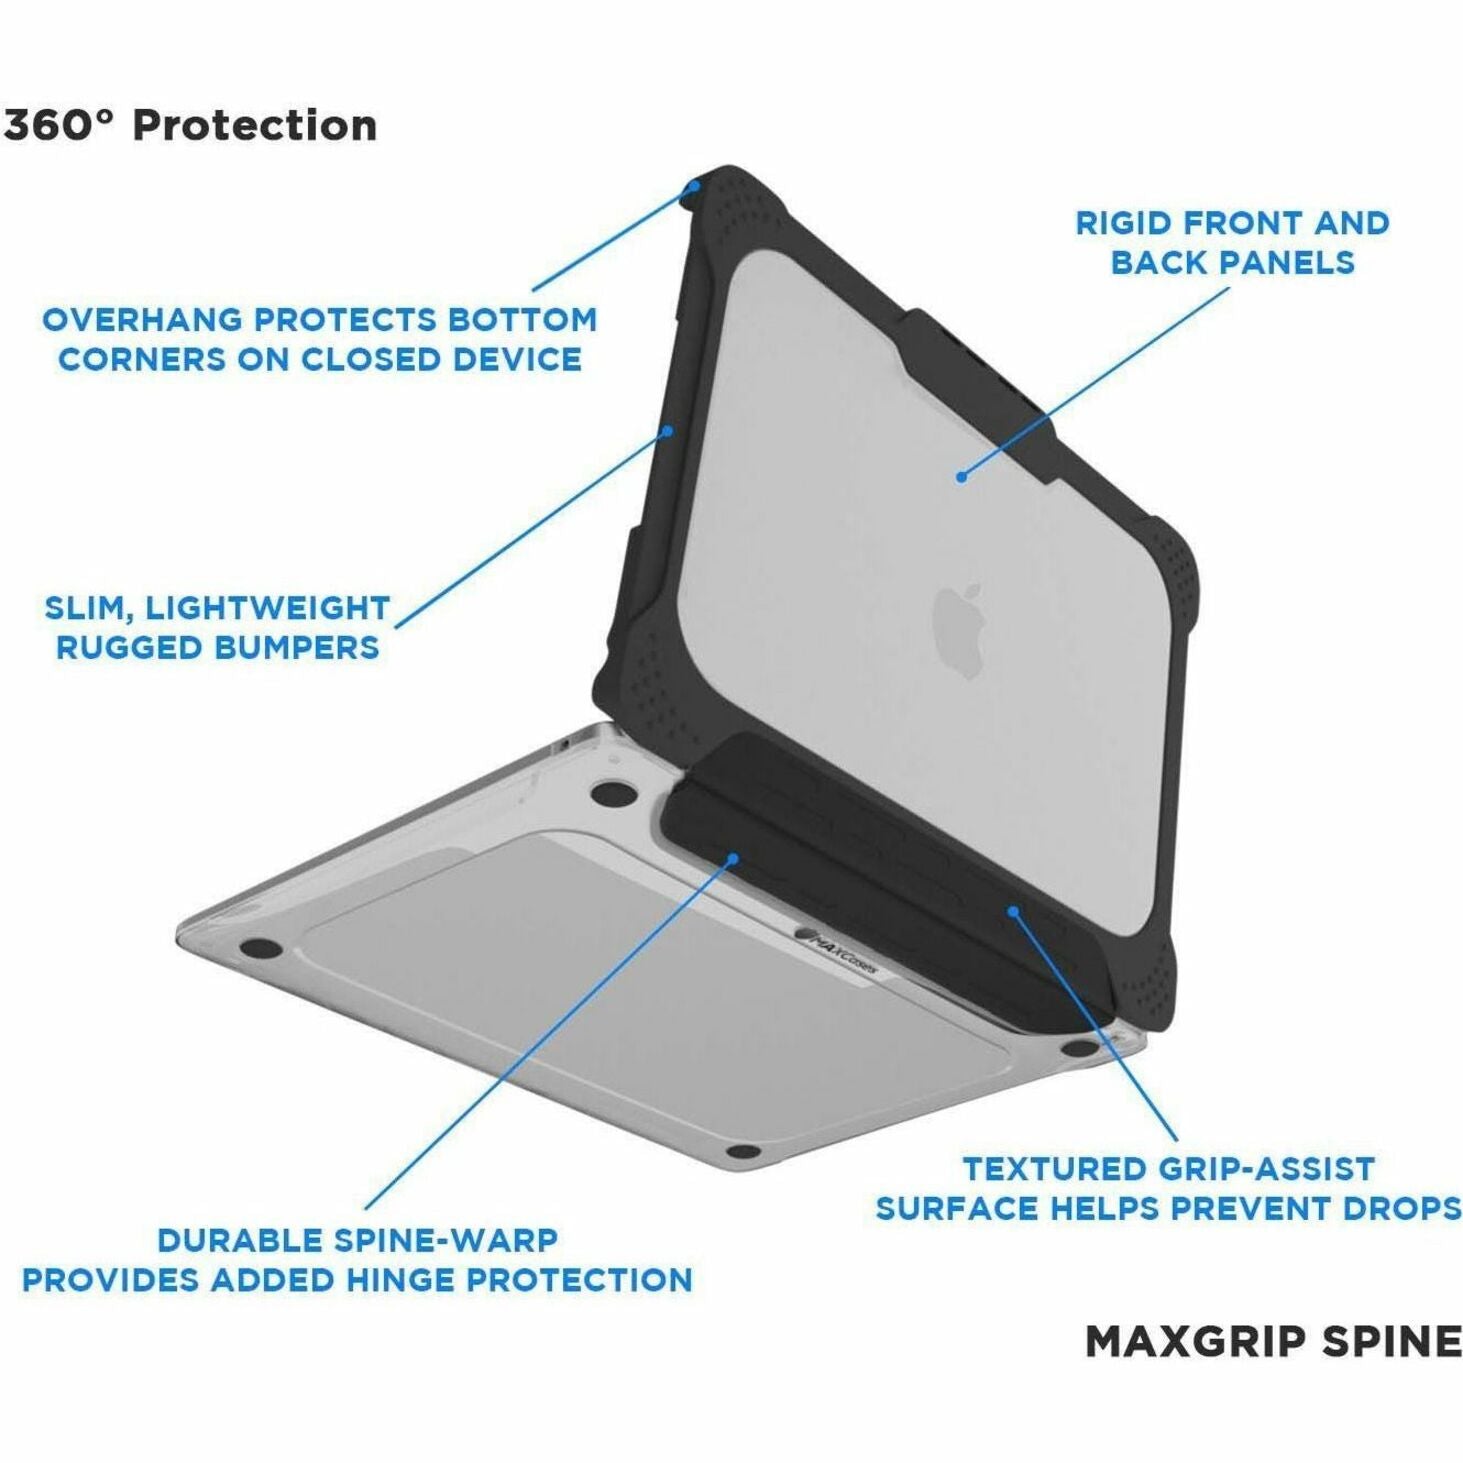 MAXCases AP-ESL-MBA-13M-BCLR Extreme Shell-L MacBook Case, Rugged Impact Resistant Black/Clear TPU Polycarbonate Grip